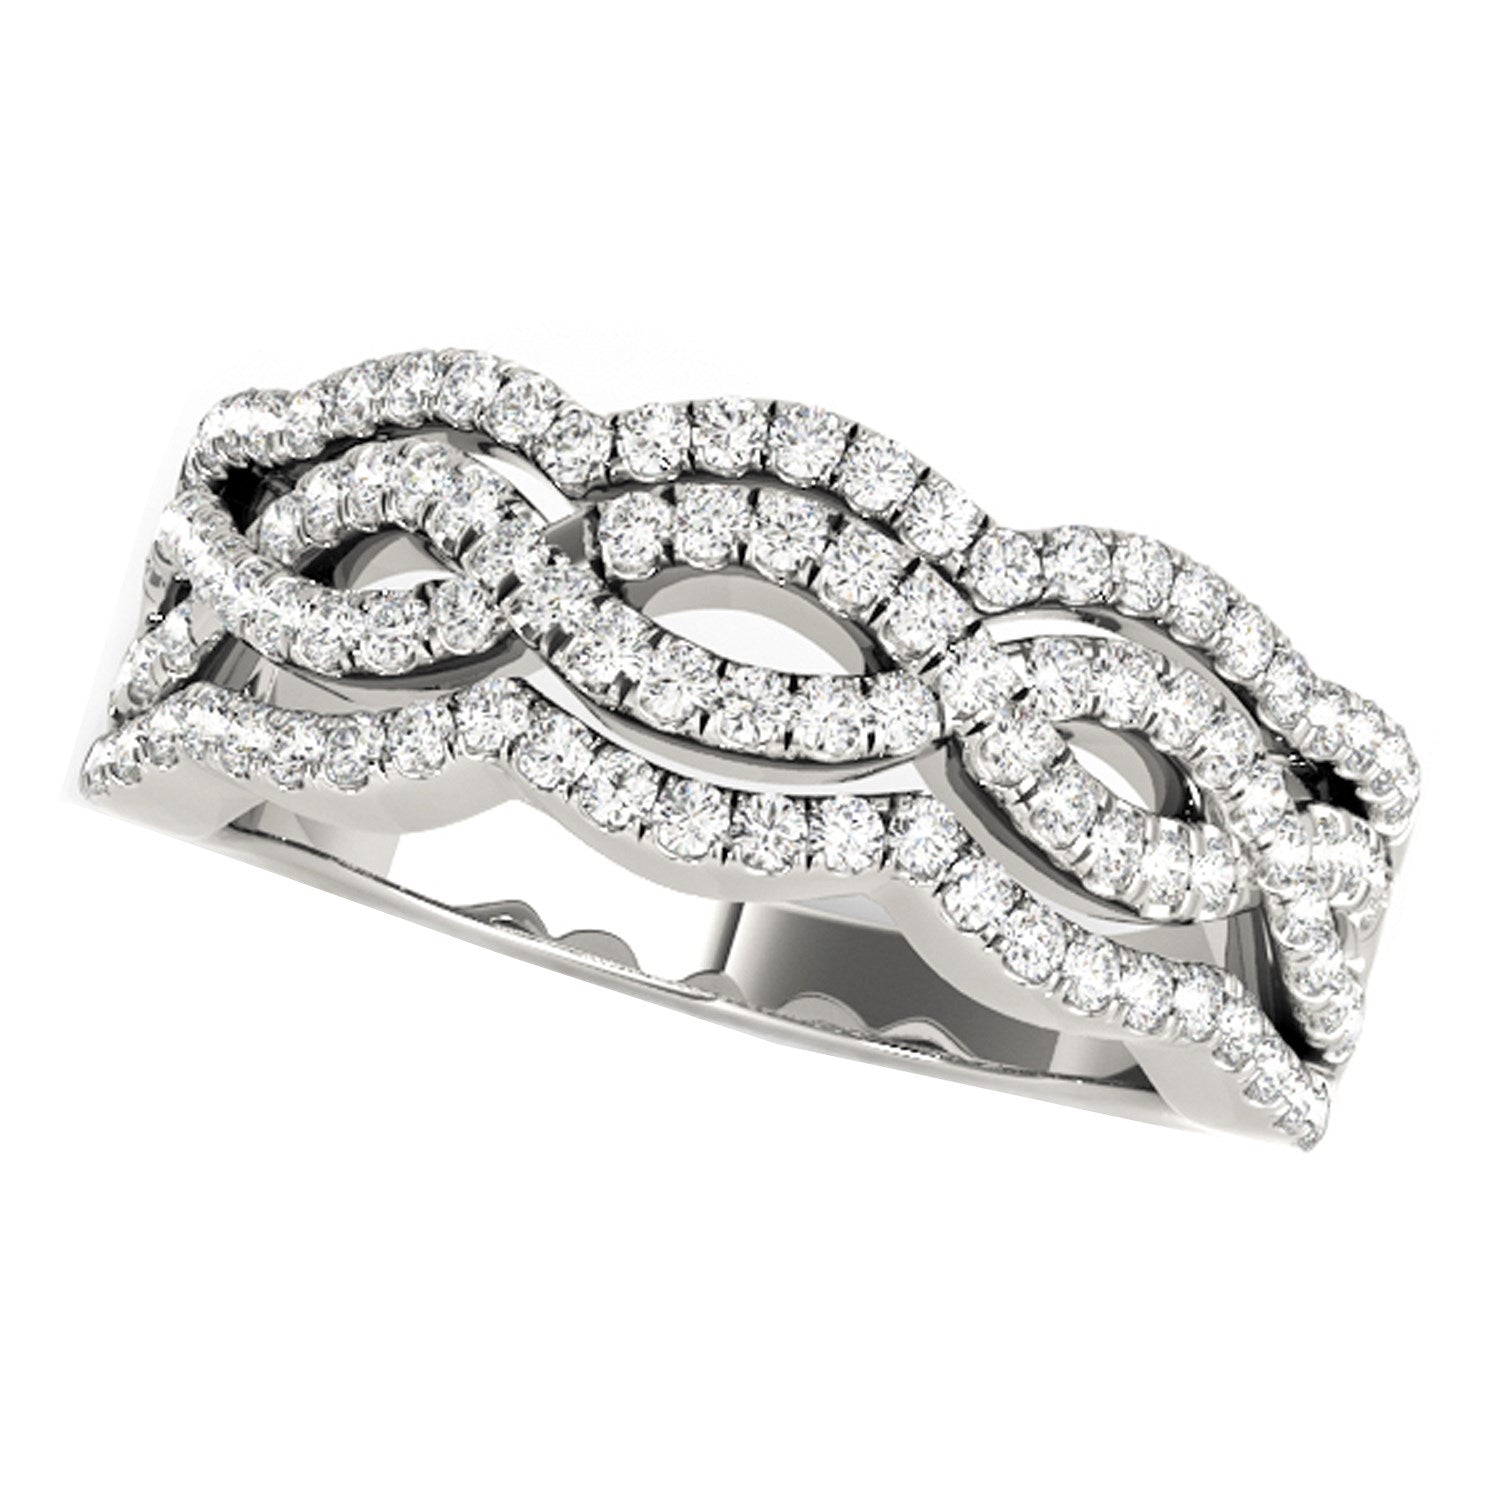 Diamond Studded Ring with Four Curves in 14k White Gold (5/8 cttw)